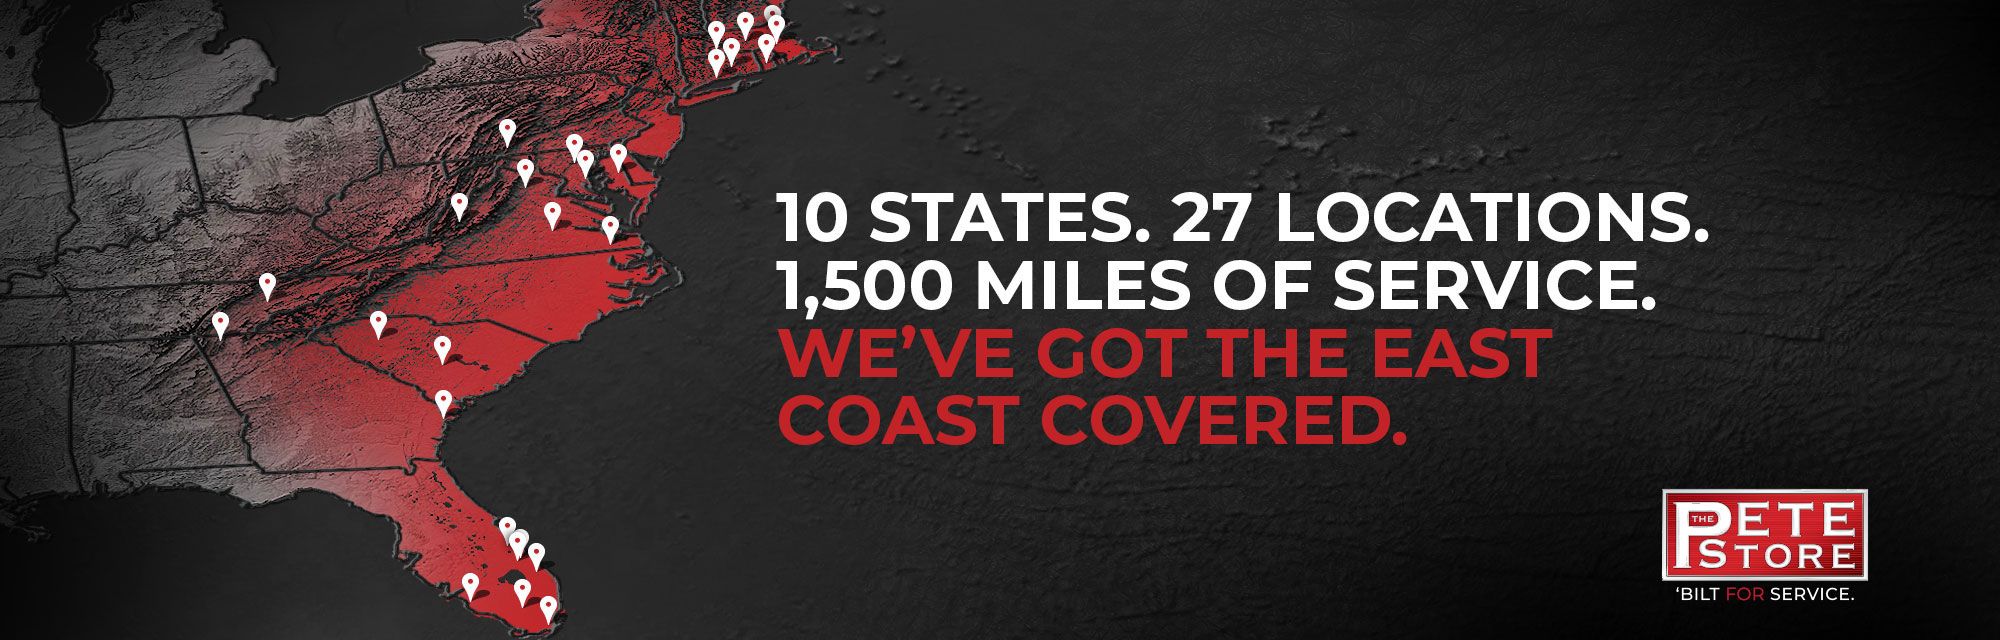 10 States.  27 Locations.  1,500 Miles of Service.  We've Got the East Coast Covered.